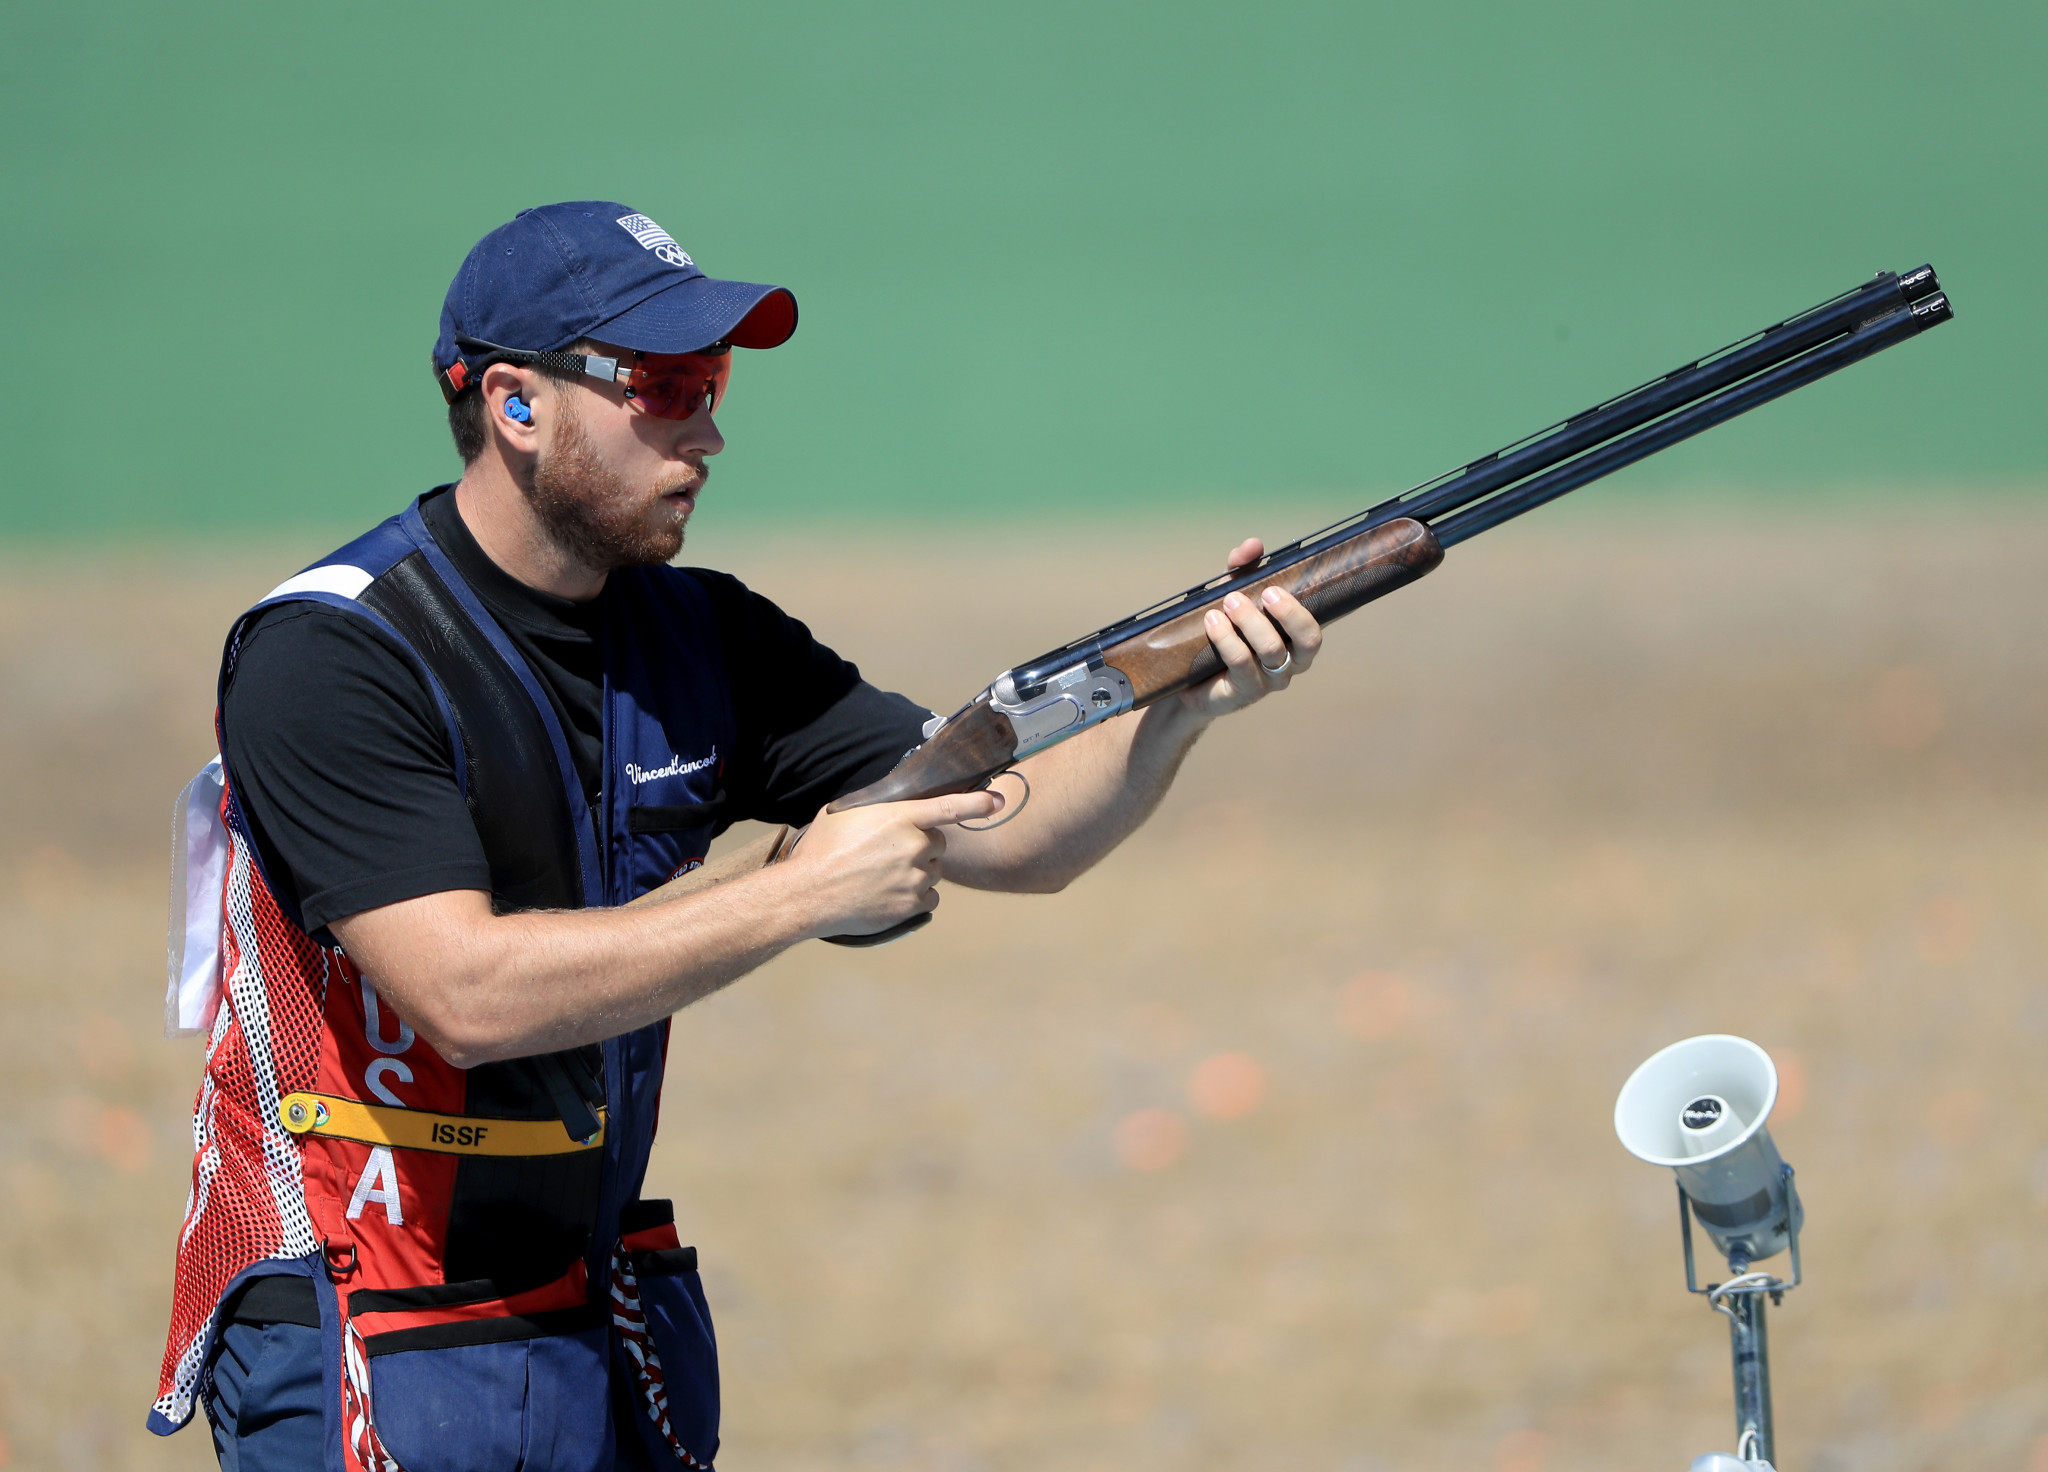 Hancock equals world record on way to men's skeet title at ISSF World Championships